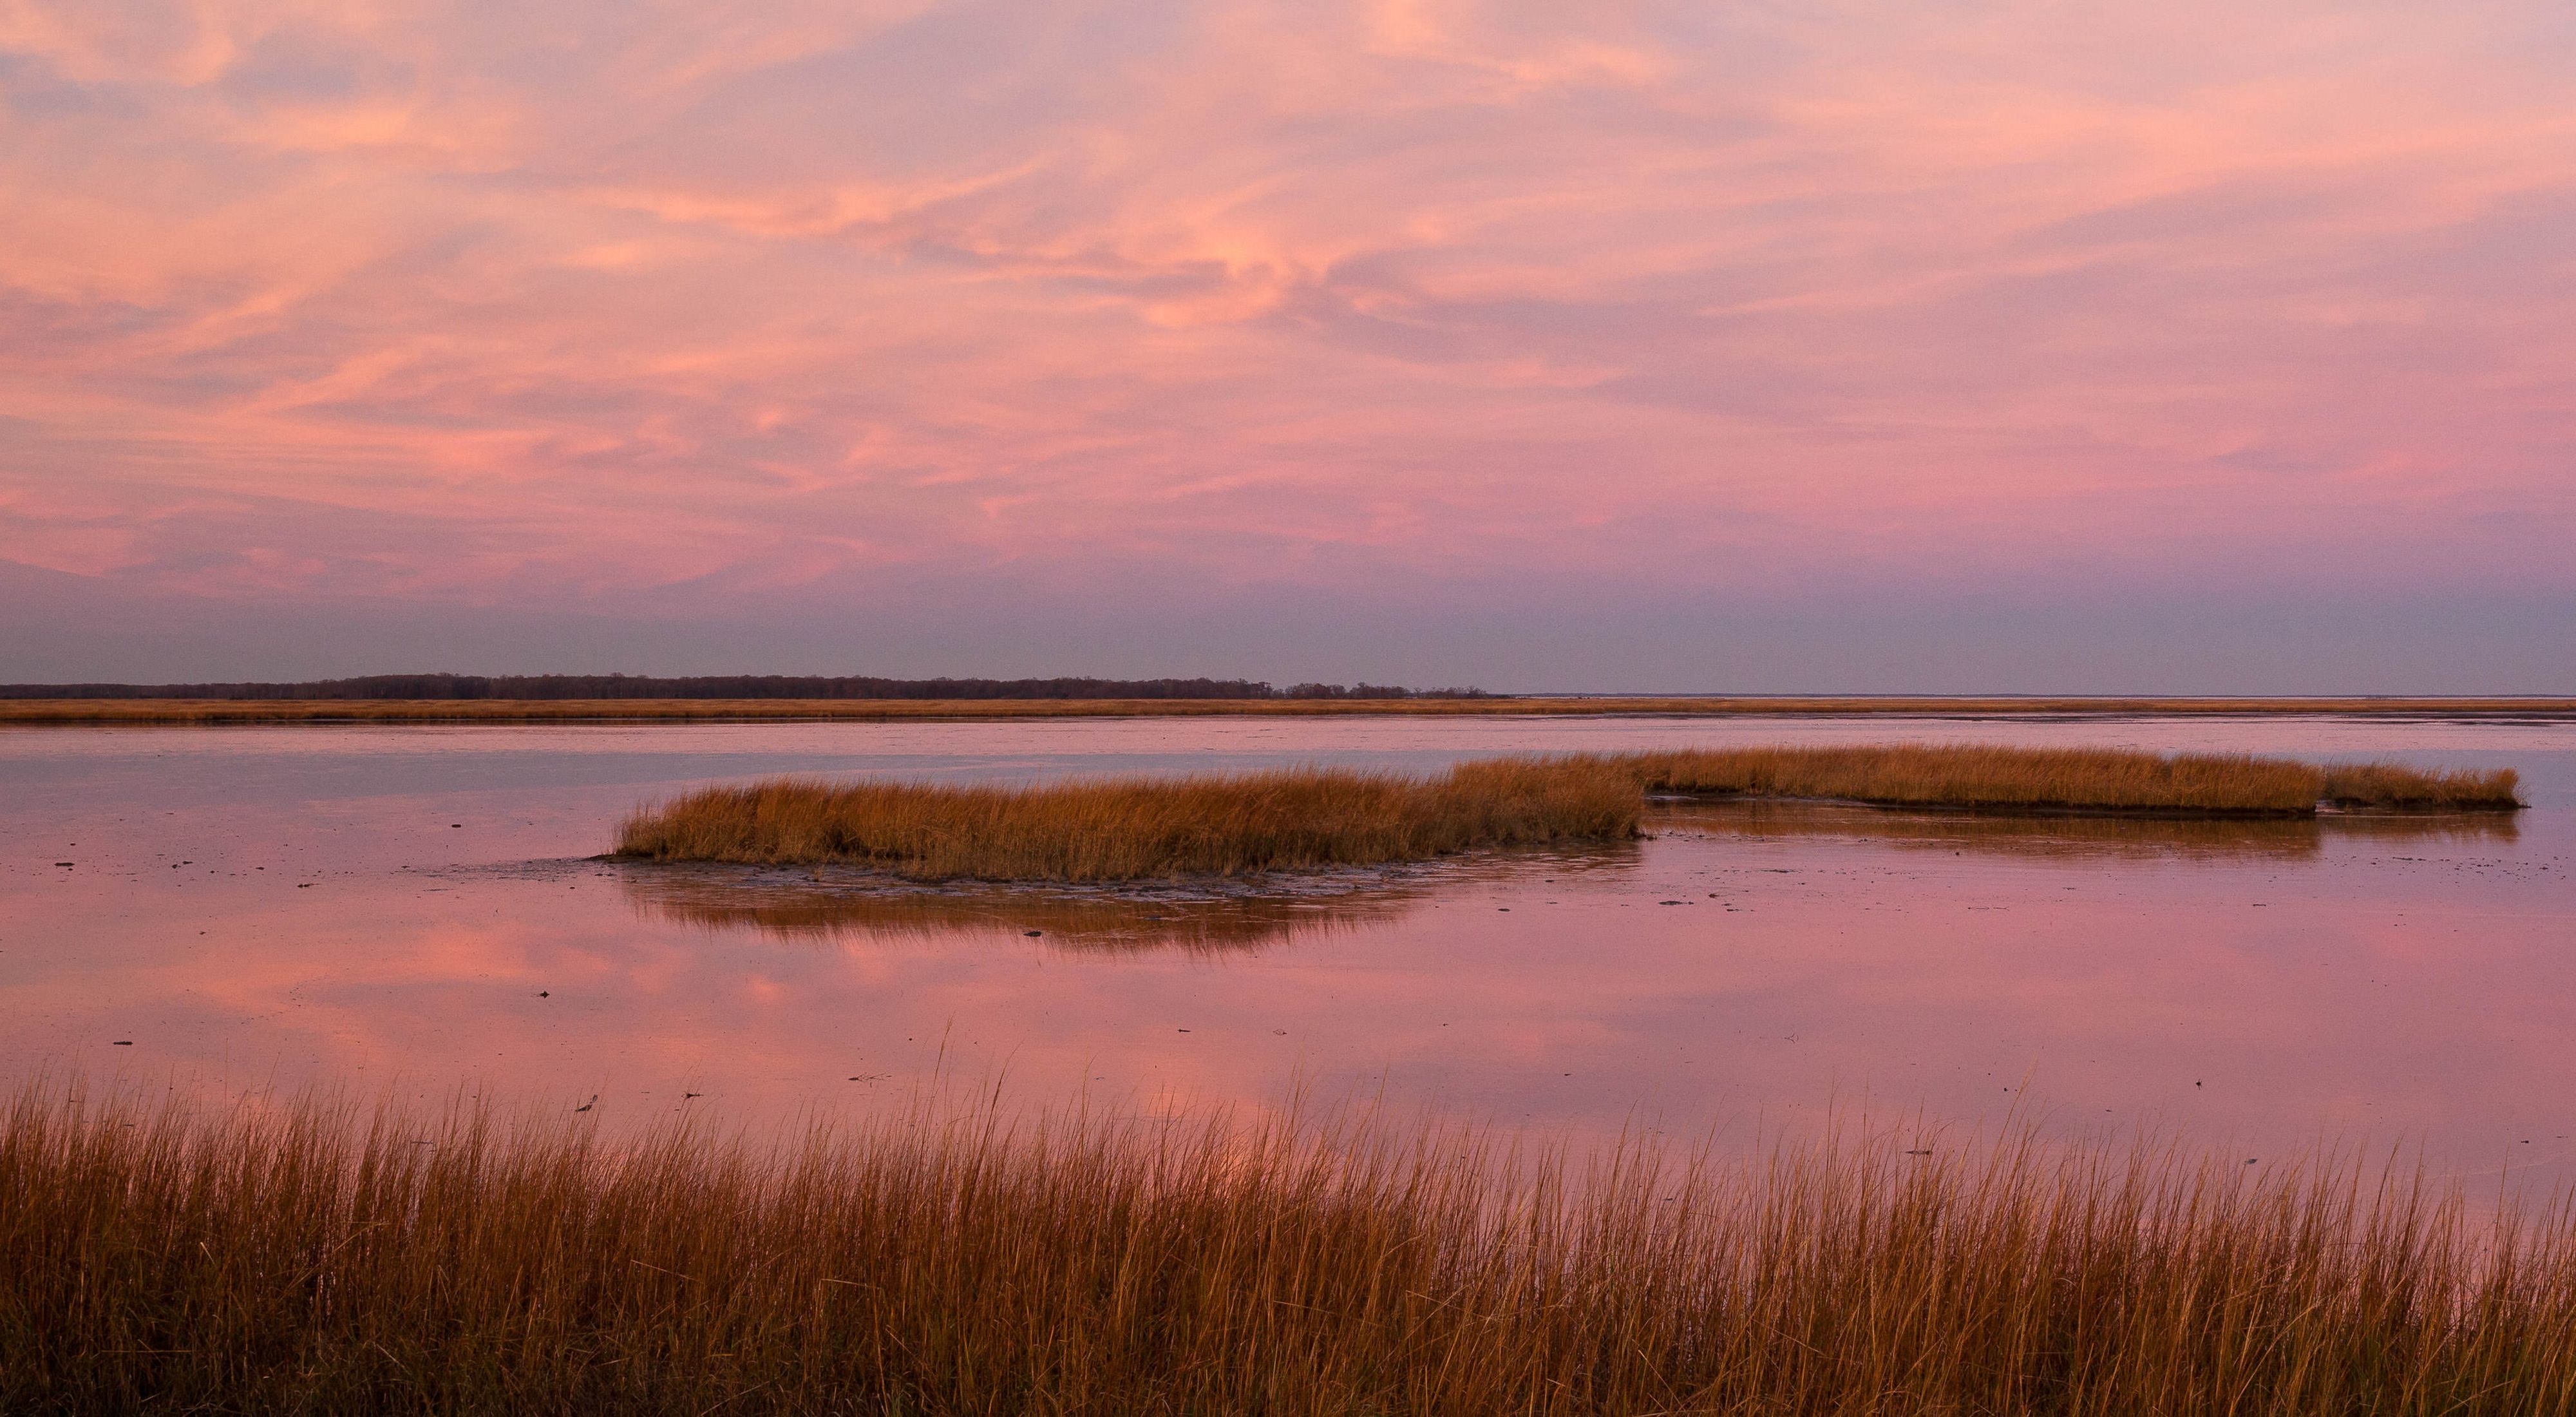 The rising sun bathes a coastal wetland in Maryland in soft pink light. Small islands of marsh grass dot the open water.